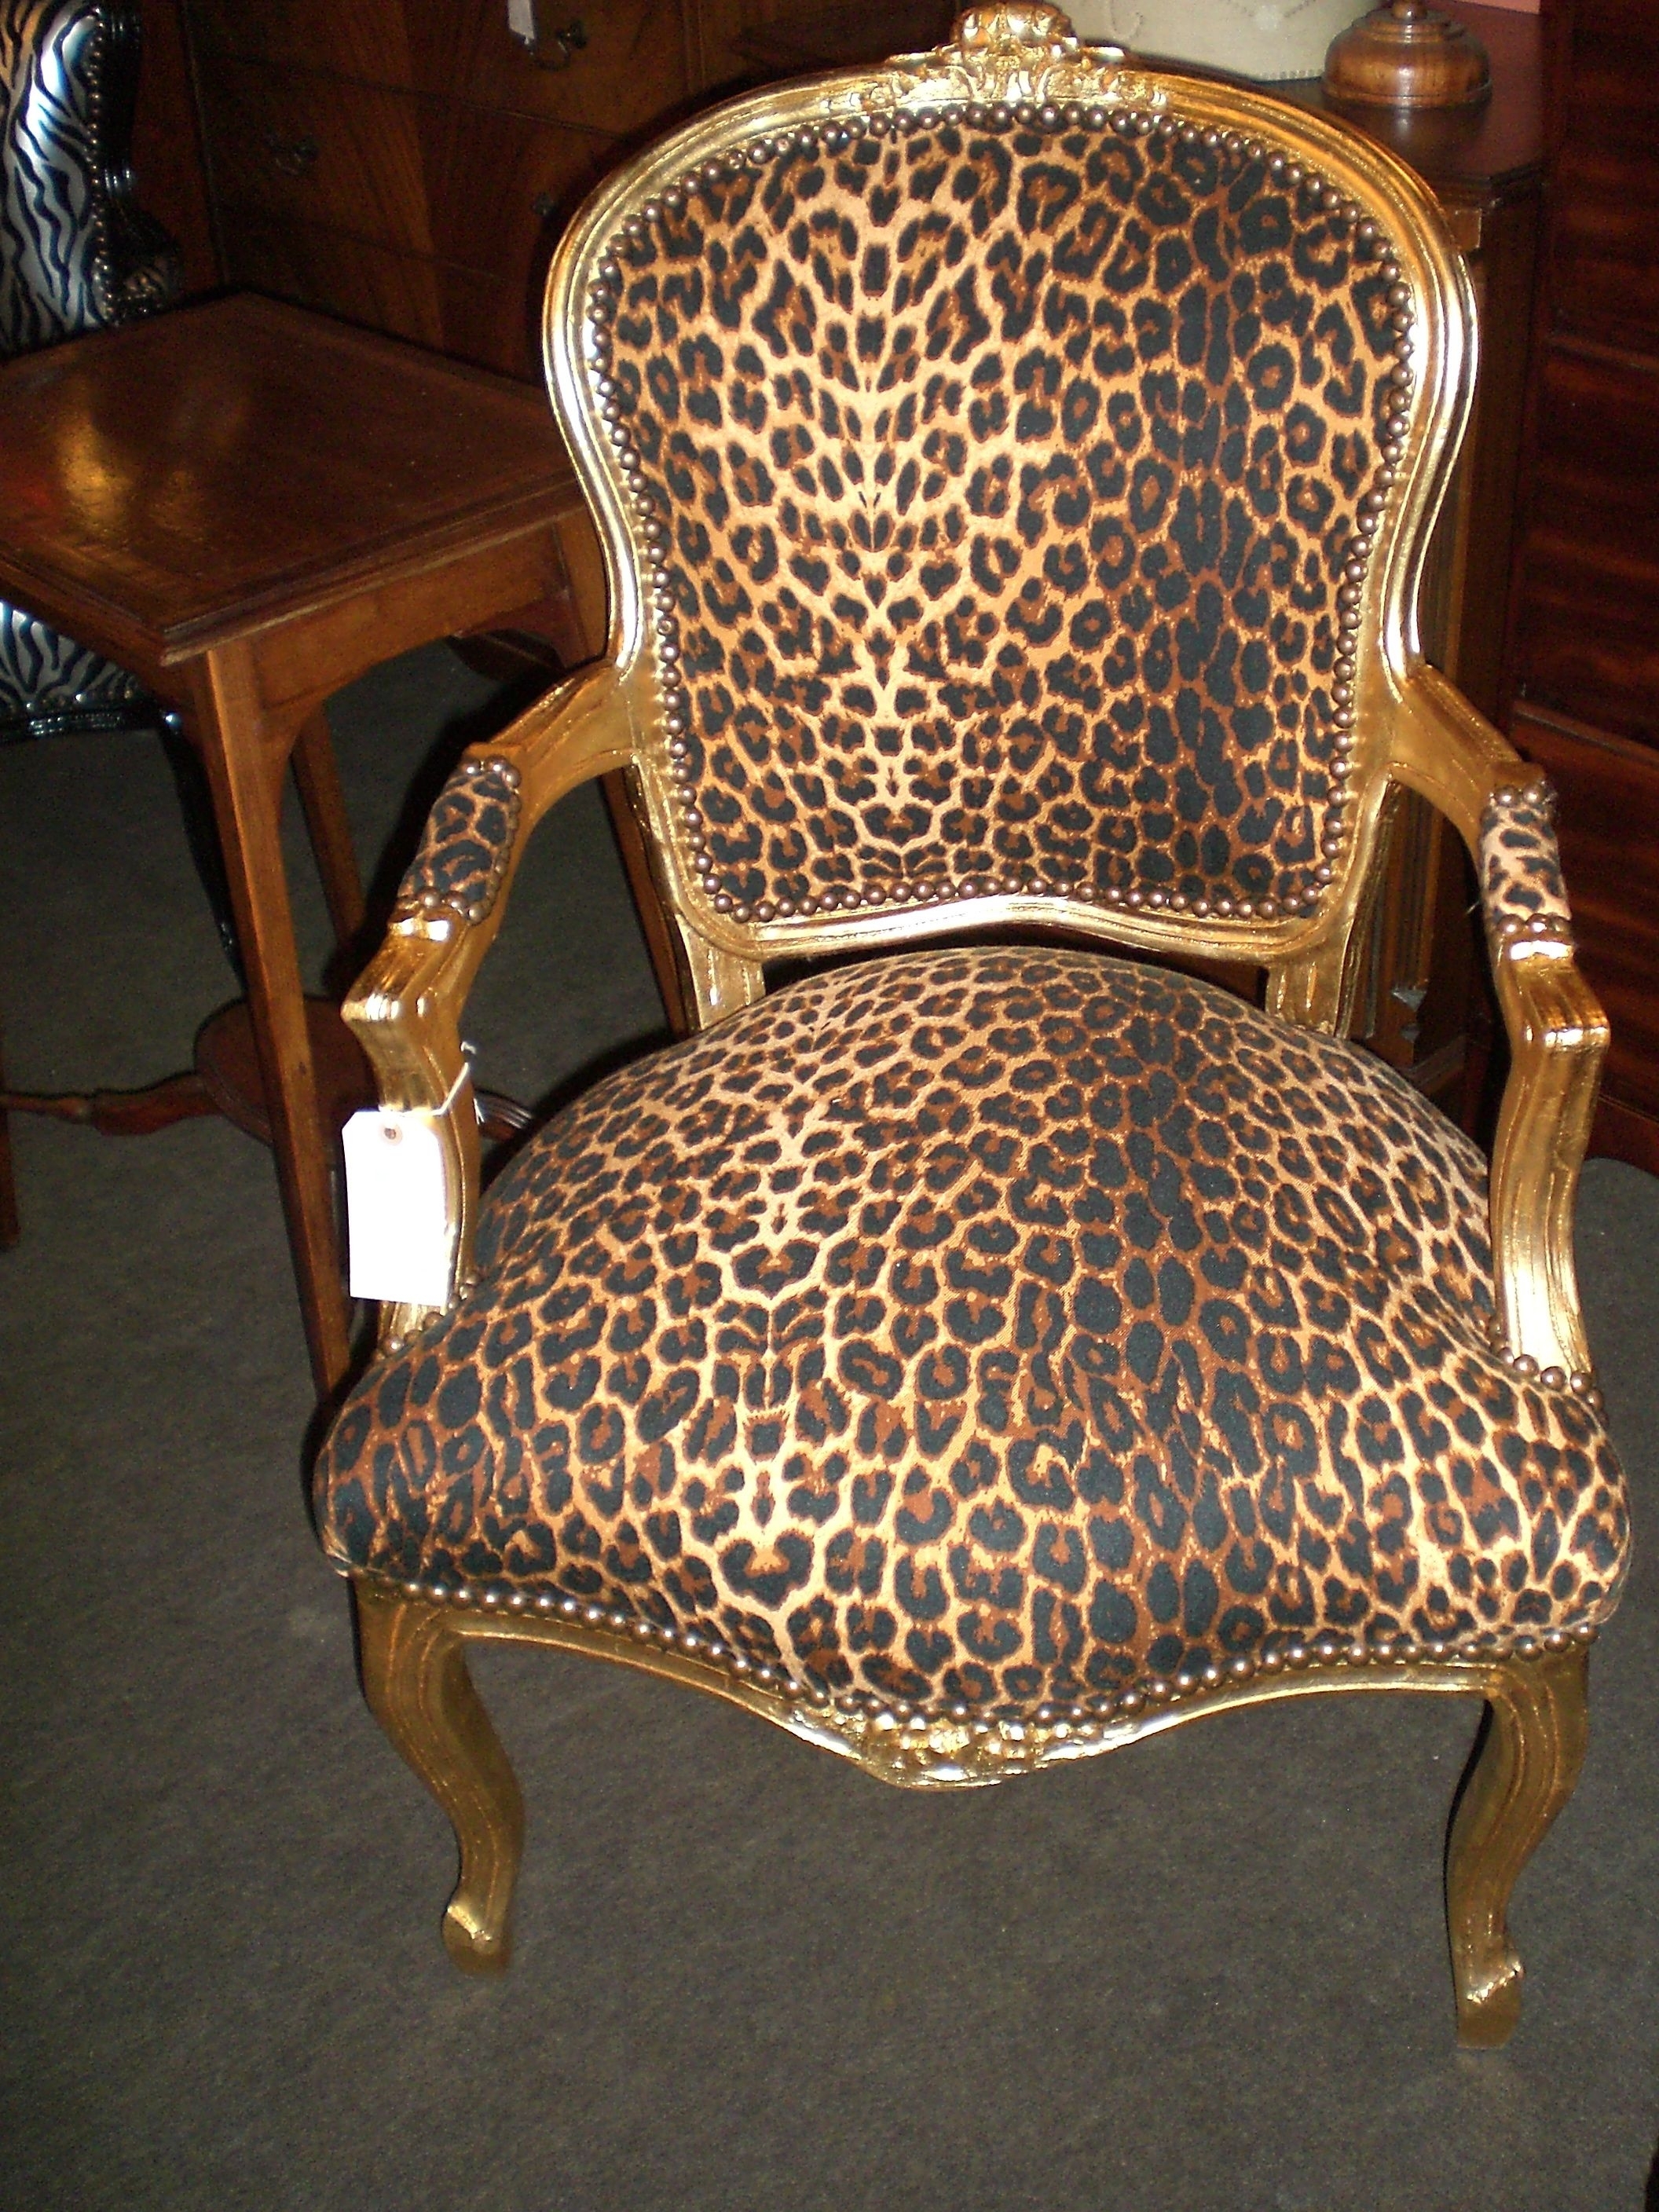 Animal Print Accent Chairs Ideas on Foter